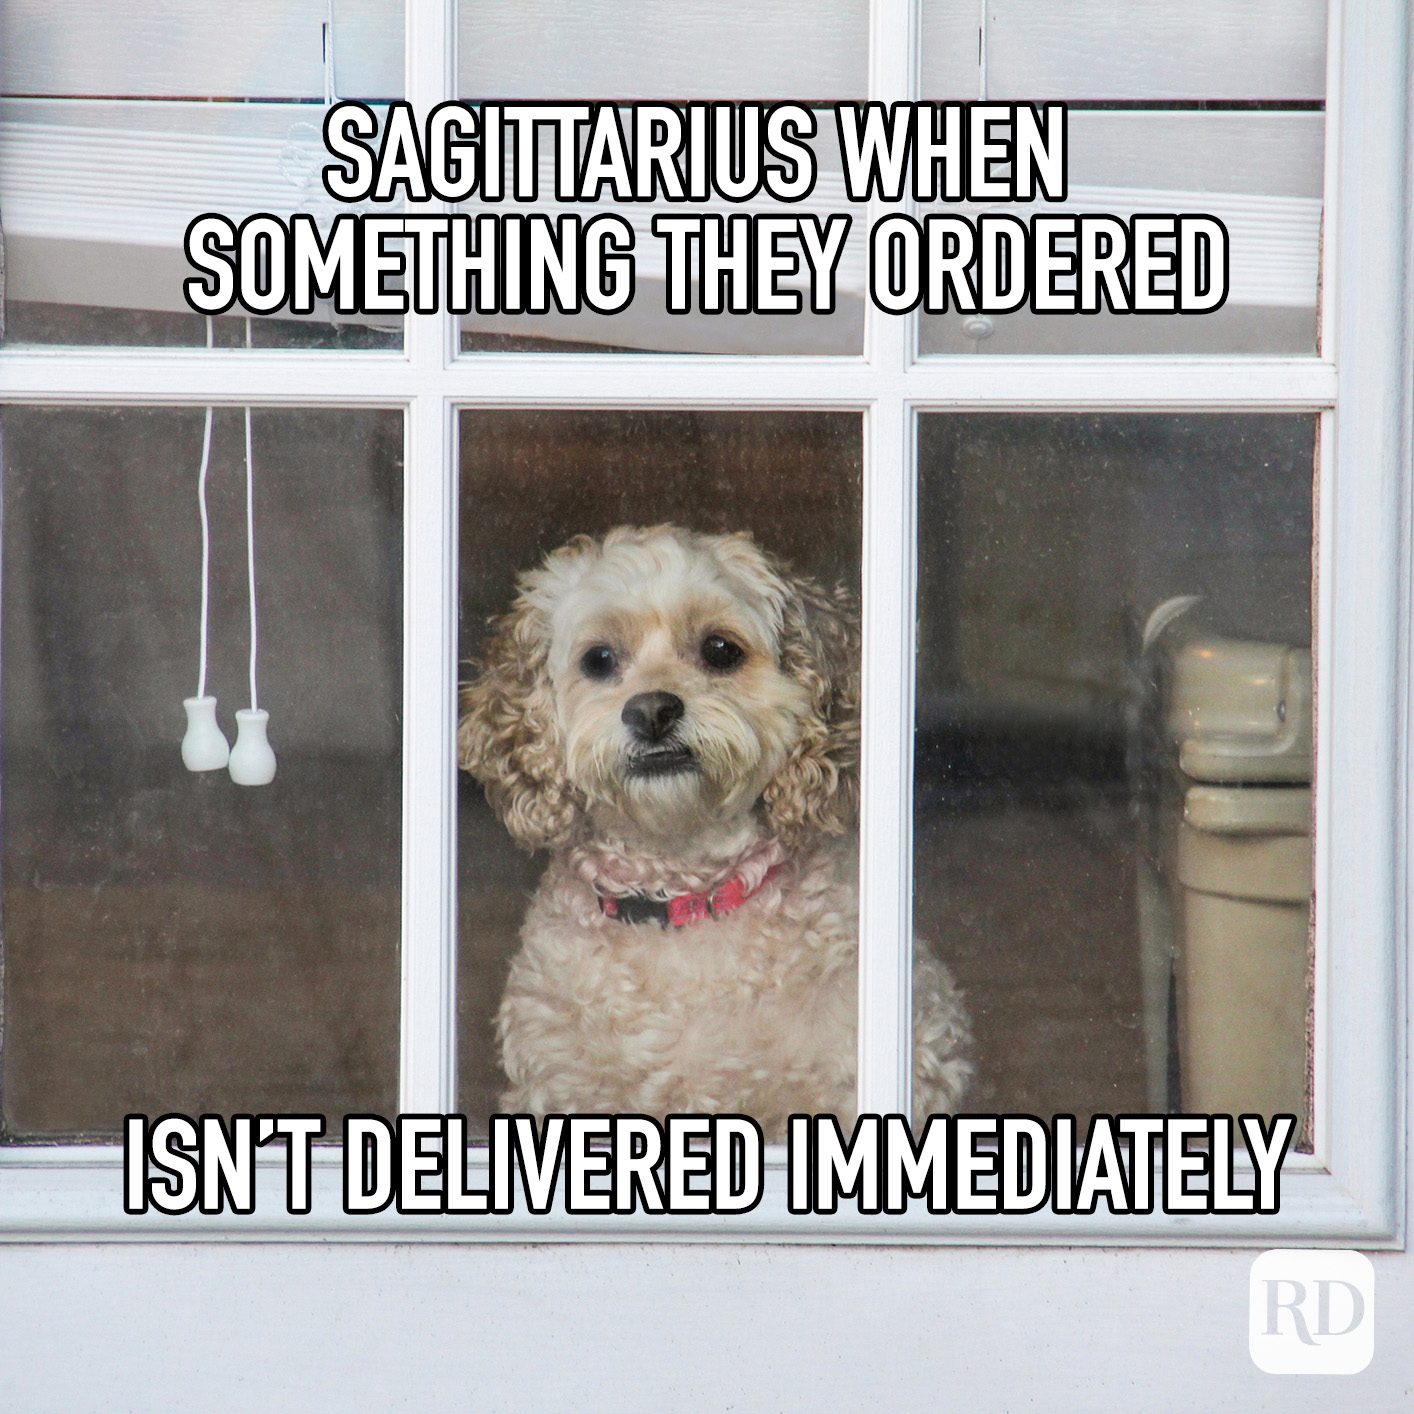 Sagittarius When Something They Ordered Isn't Delivered Immediately meme text on image of dog staring out window